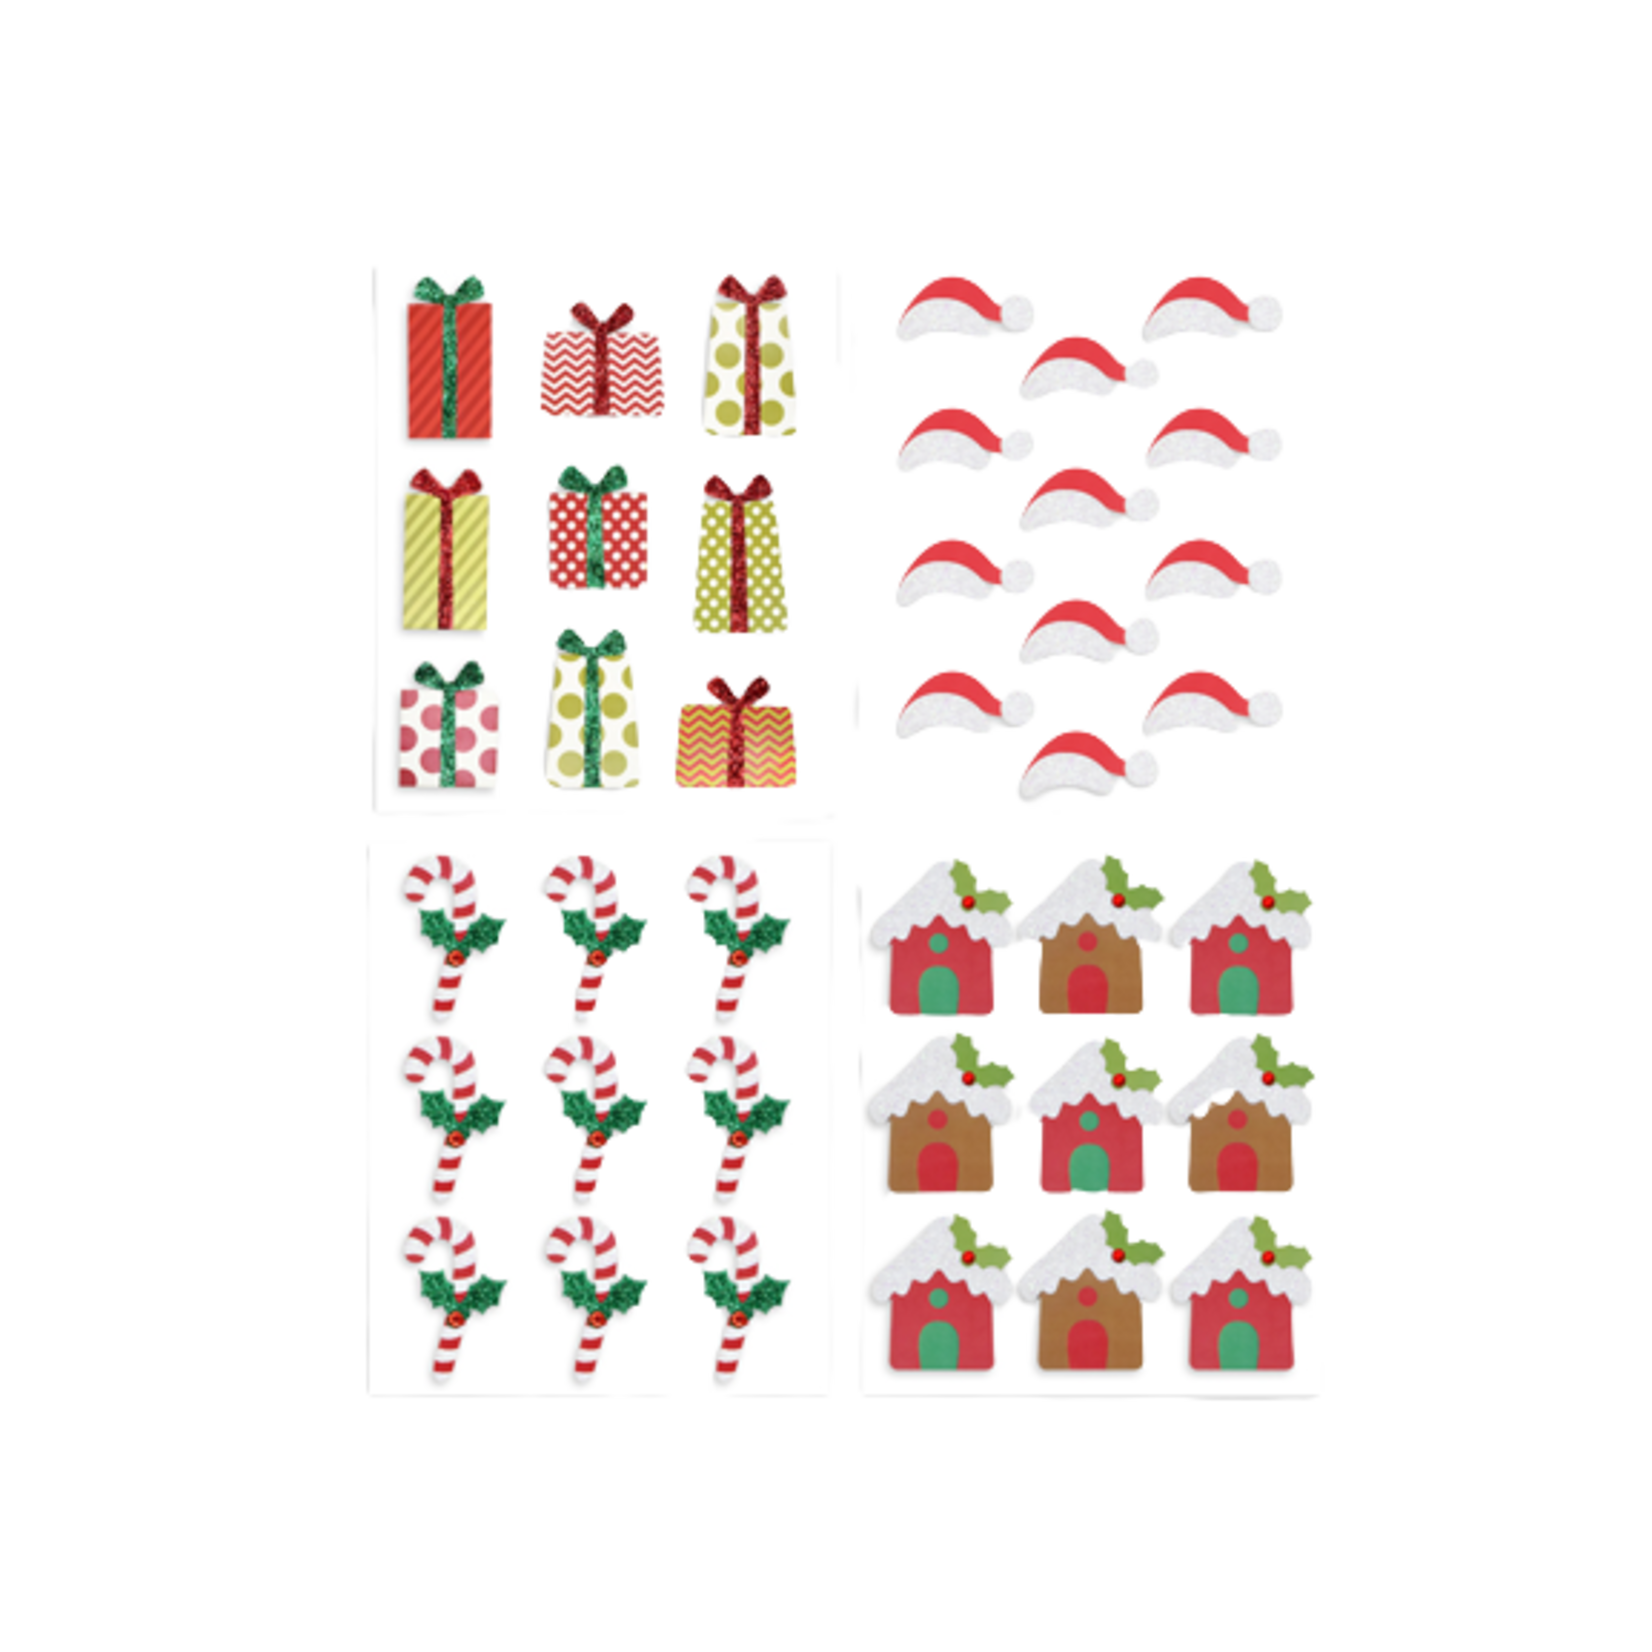 4.5INx5.75IN 3D HANDMADE A) HOLIDAY ICONS 1 - 4 STYLES AVAILABLE - PER STYLE